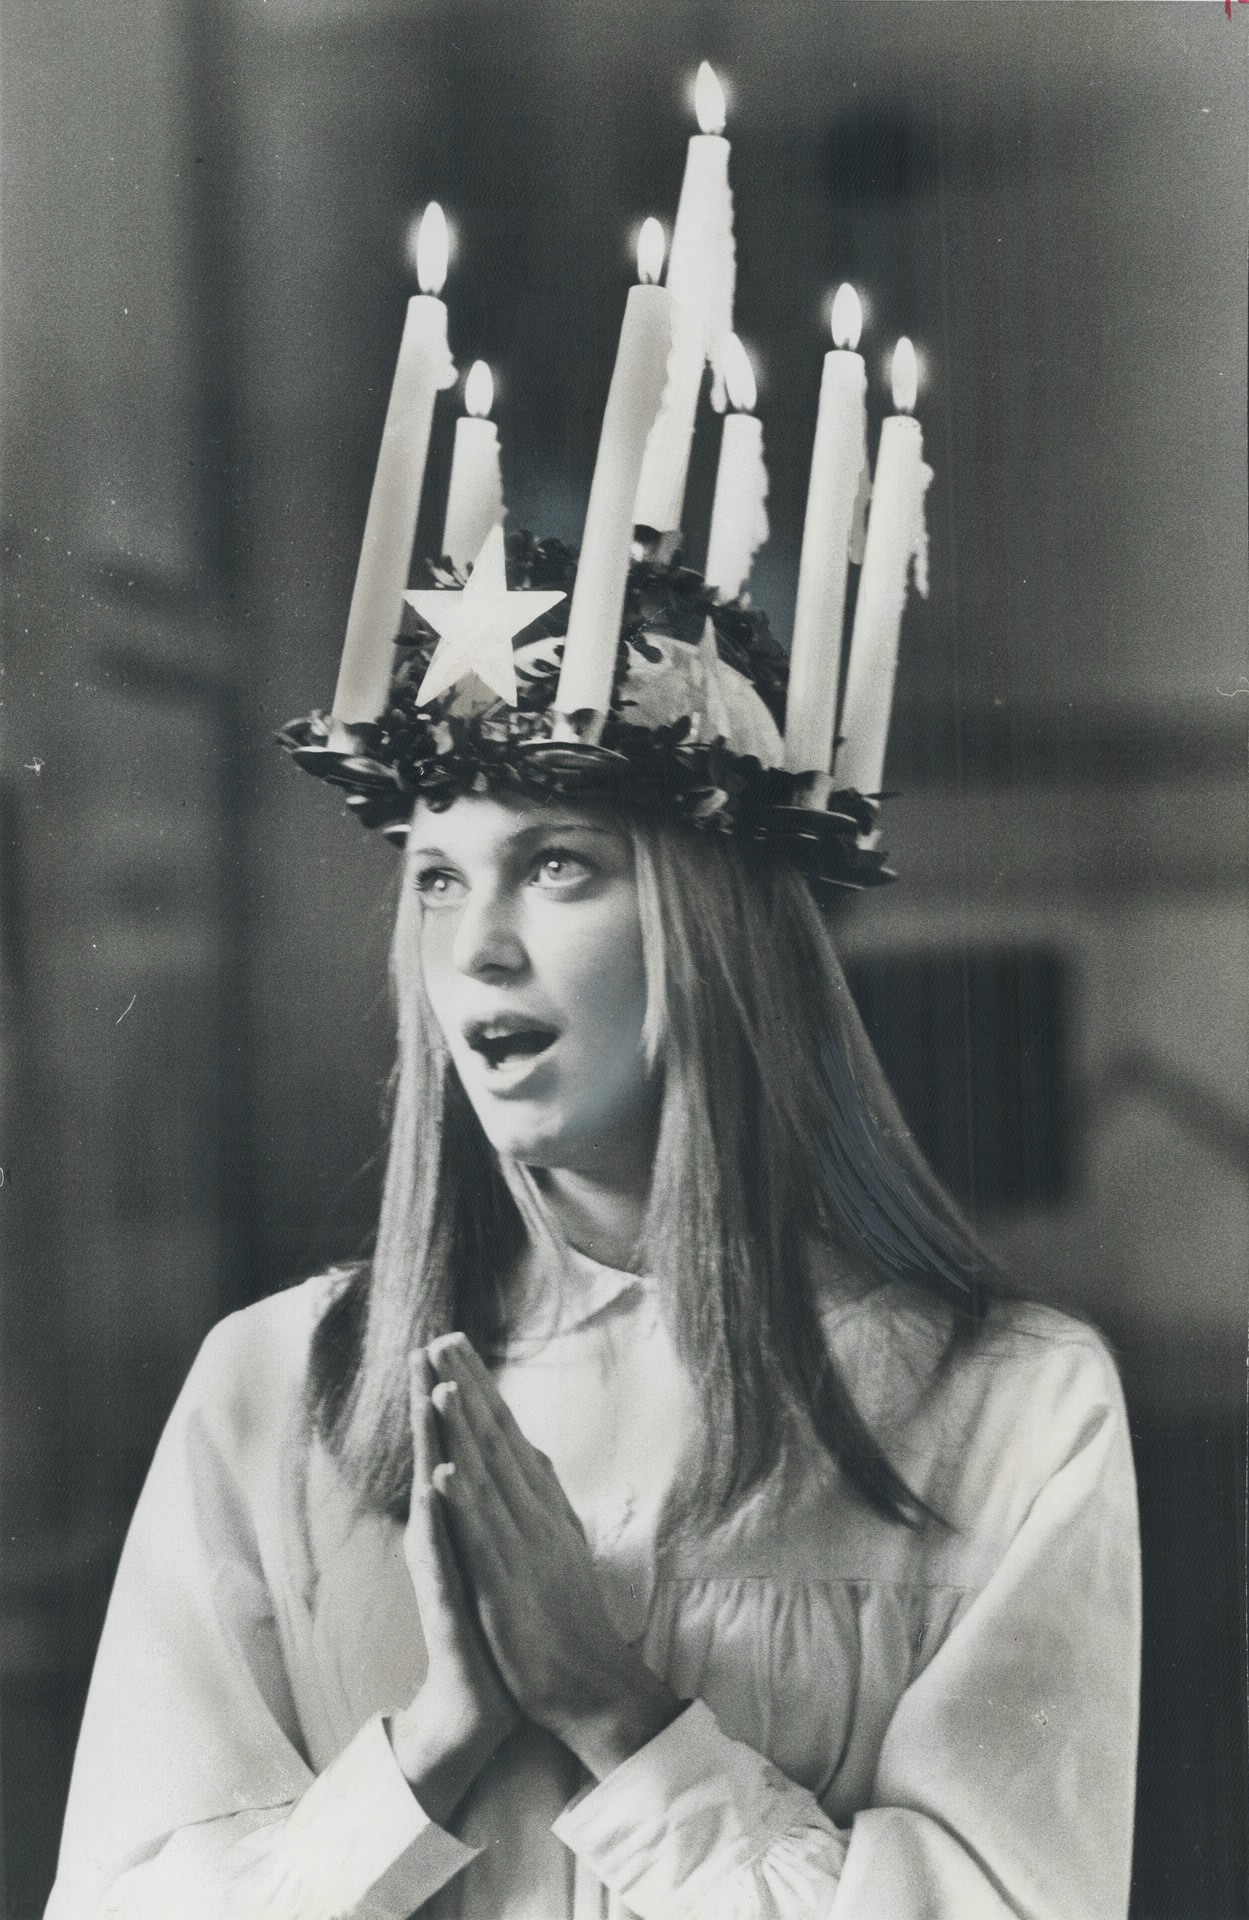 A Christmas 'Crown of candles'. Marking the annual Lucia Day festival of lights, 19-year-old Anne Marie Peterson of Stockholm, Sweden wears a crown of candles after being crowned Queen of Light by the Scandinavian-Canadian Club at Queen's Park.